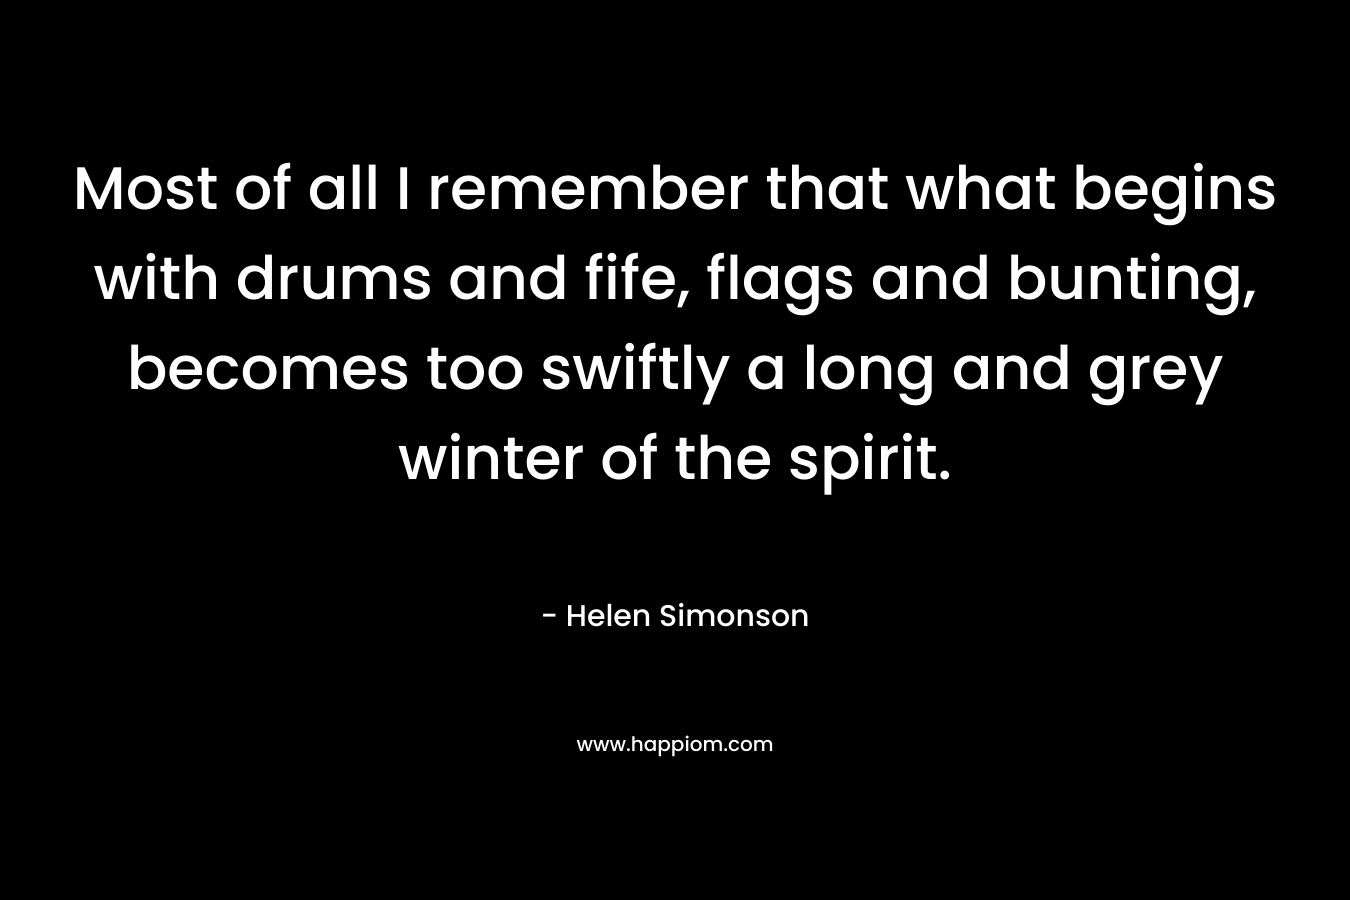 Most of all I remember that what begins with drums and fife, flags and bunting, becomes too swiftly a long and grey winter of the spirit.